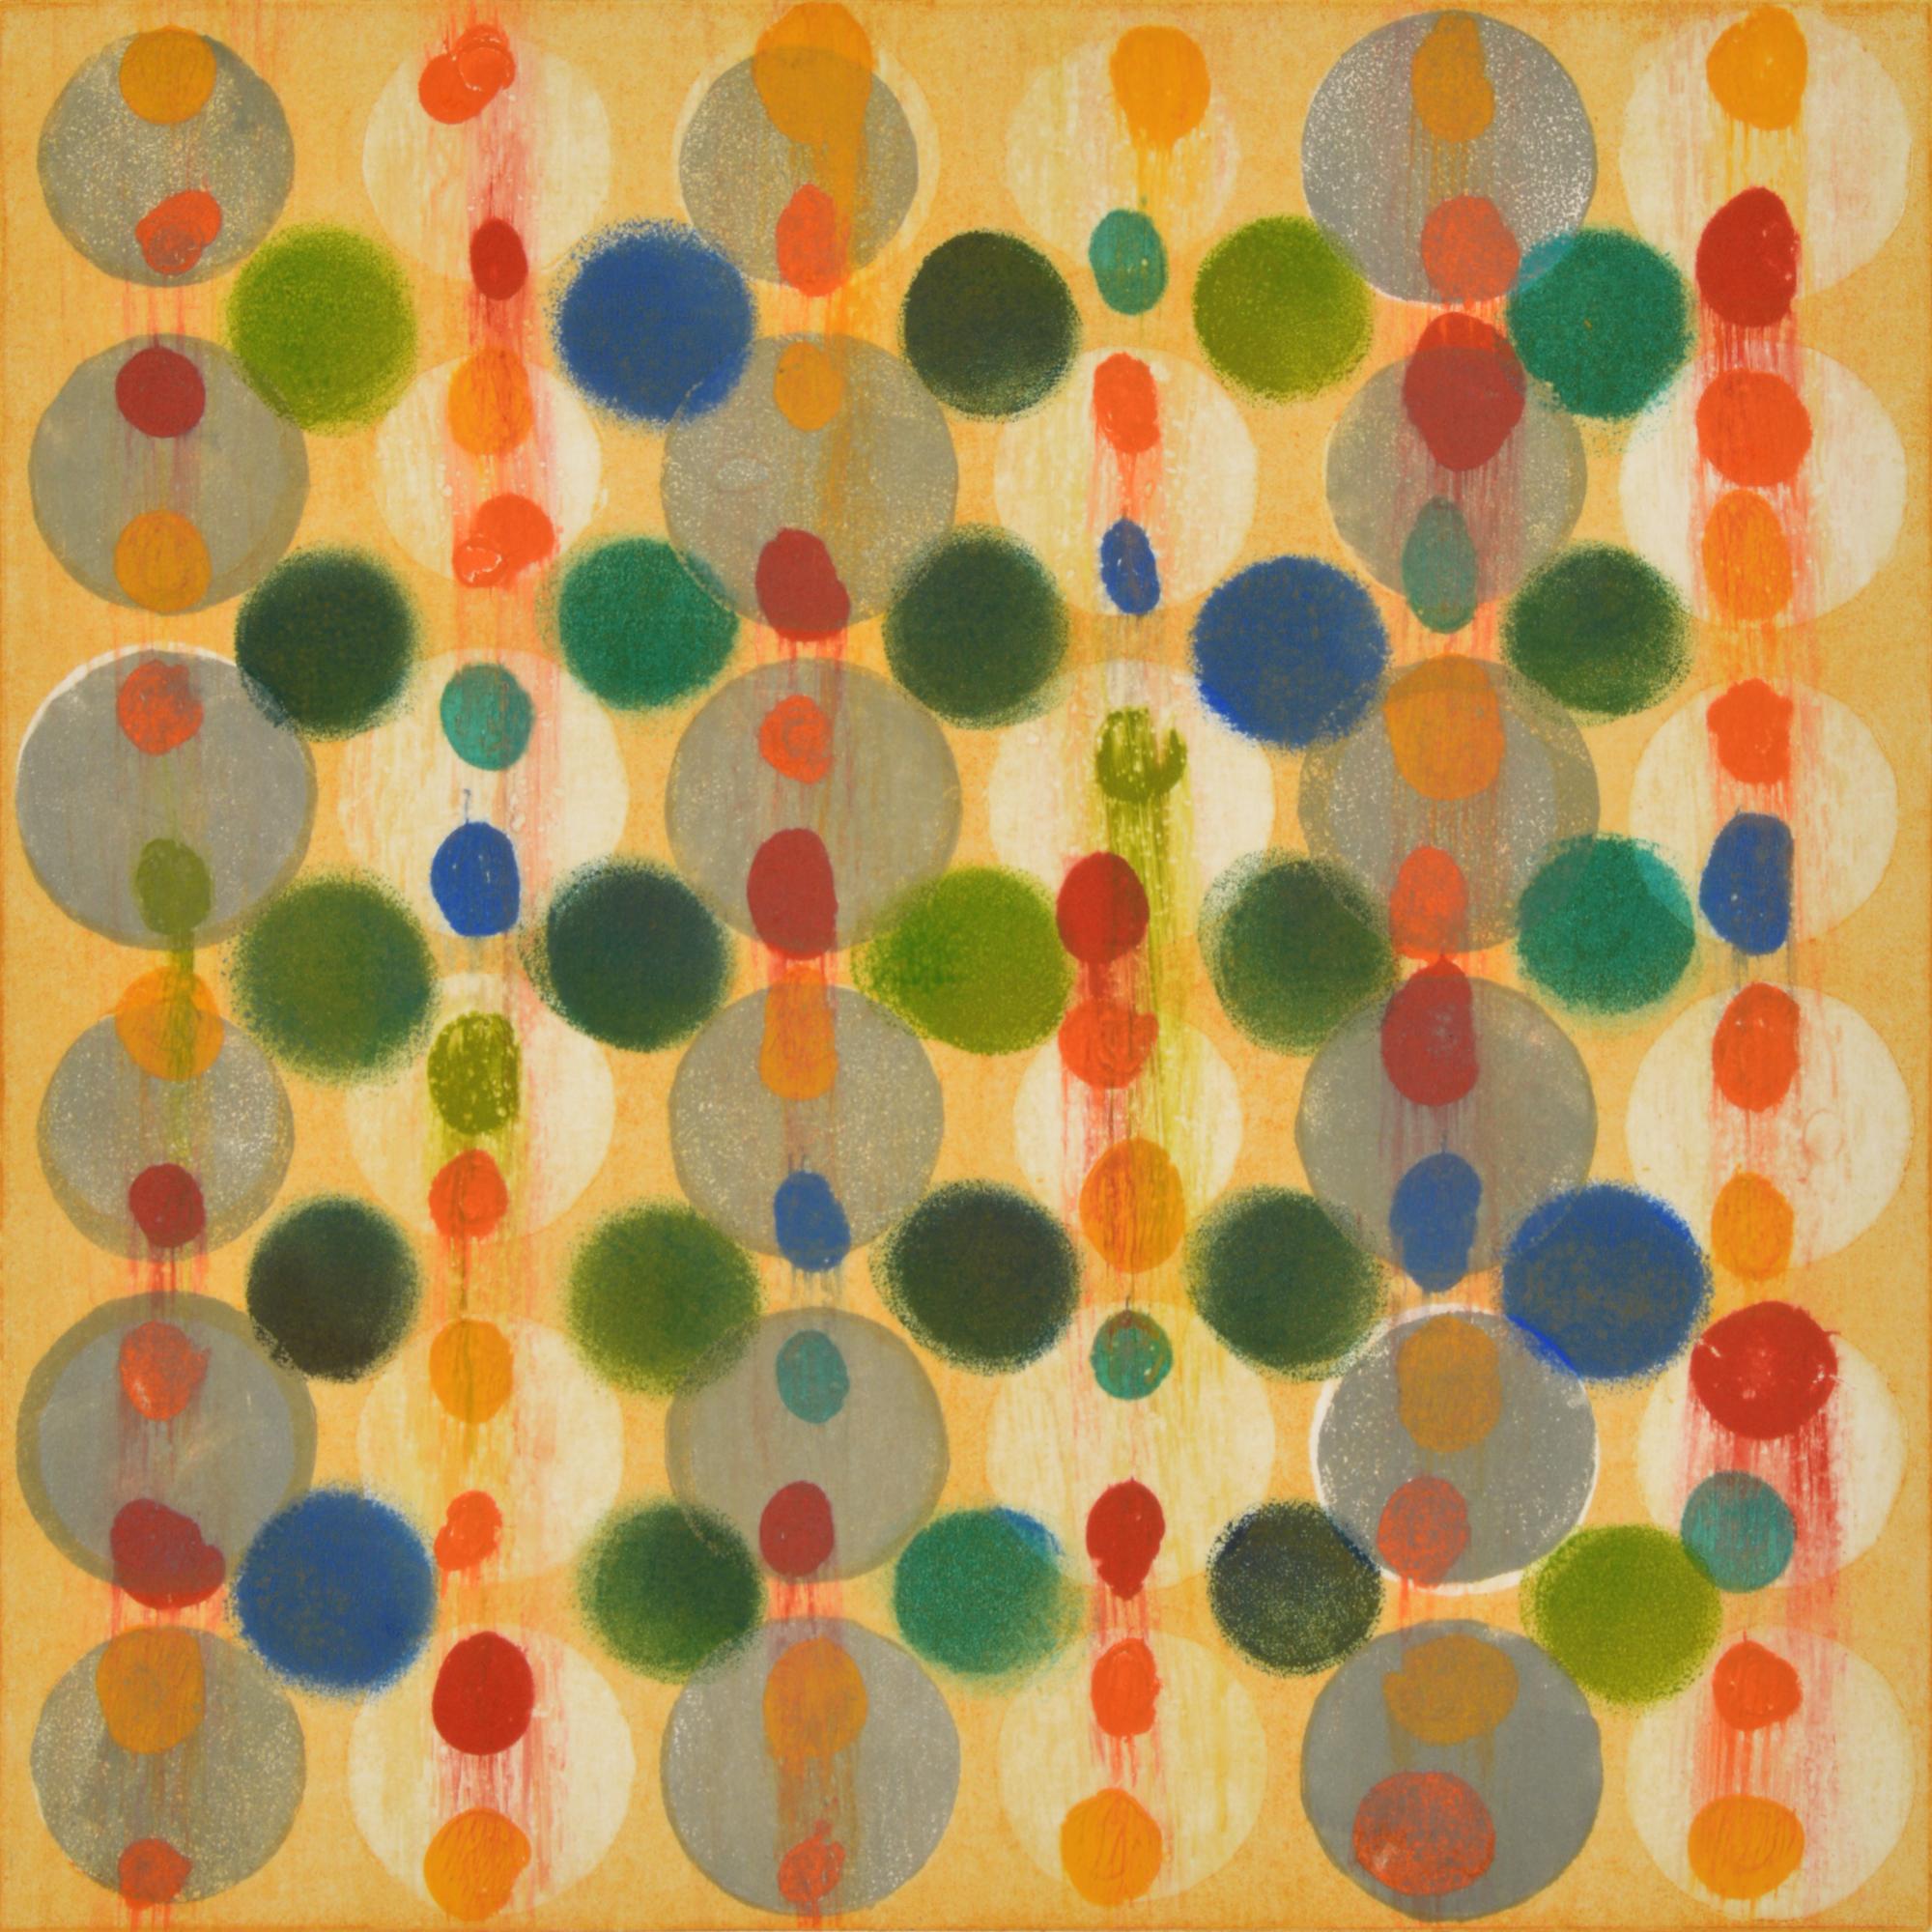 Janine Wong Abstract Print - "Dot Variant 15", color dots, abstract, yellow, green, blue, teal, red, orange